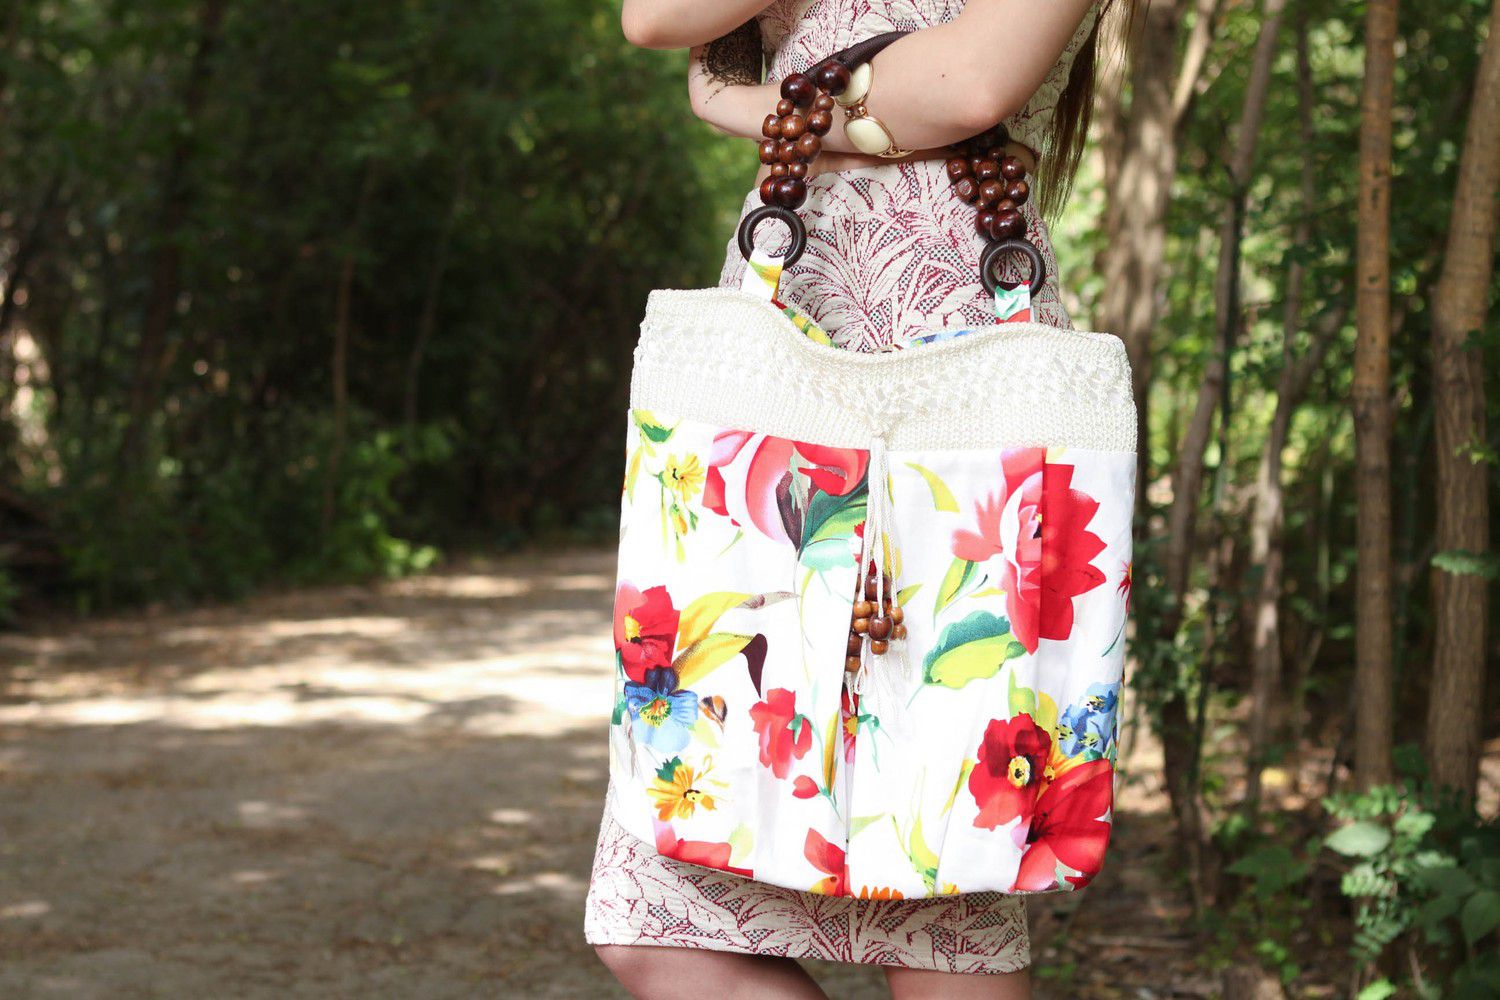 Woman's bag with floral picture photo 6